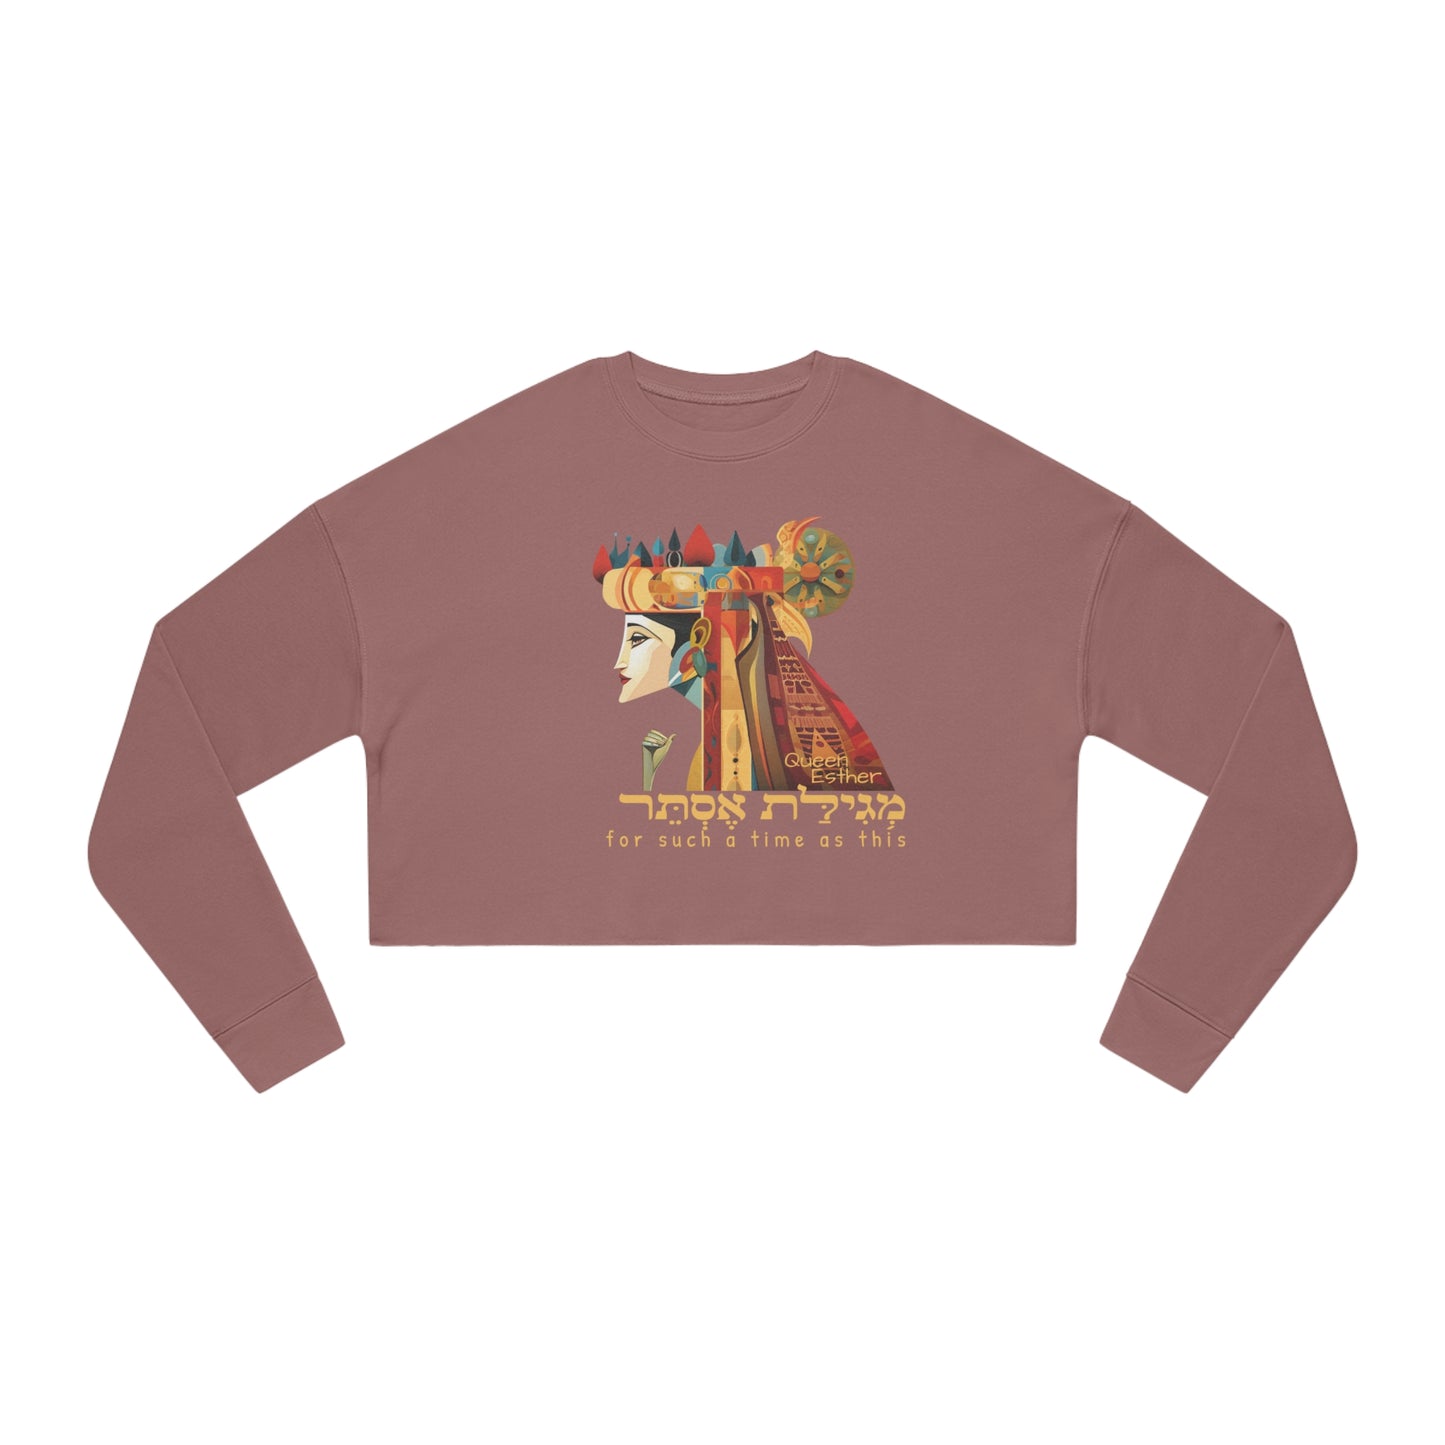 Purim Queen Esther For Such Time As This - Women's Cropped Sweatshirt